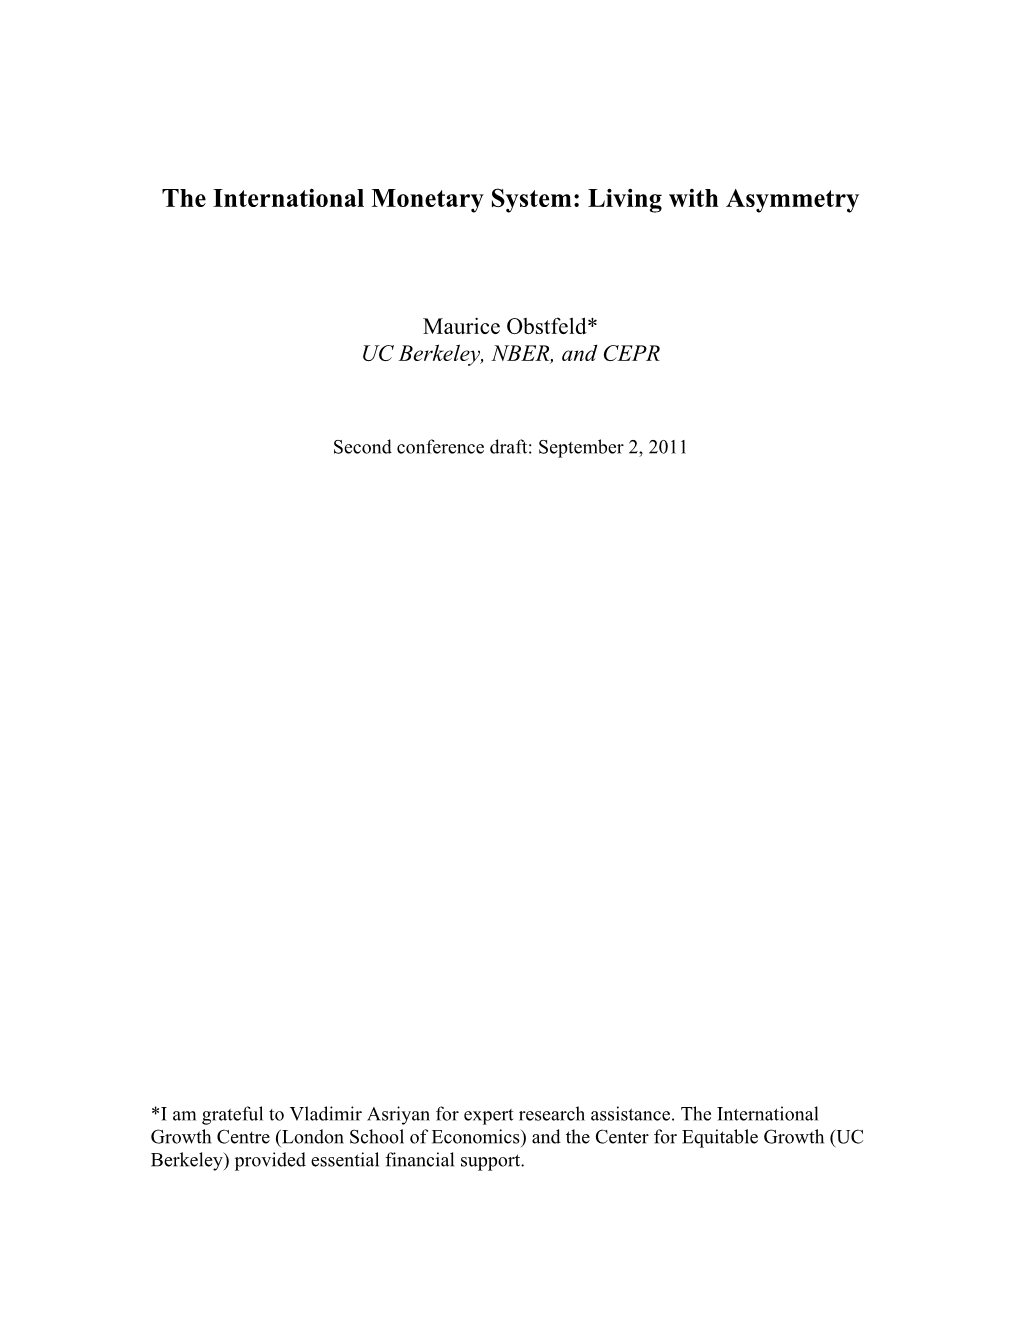 The International Monetary System: Living with Asymmetry